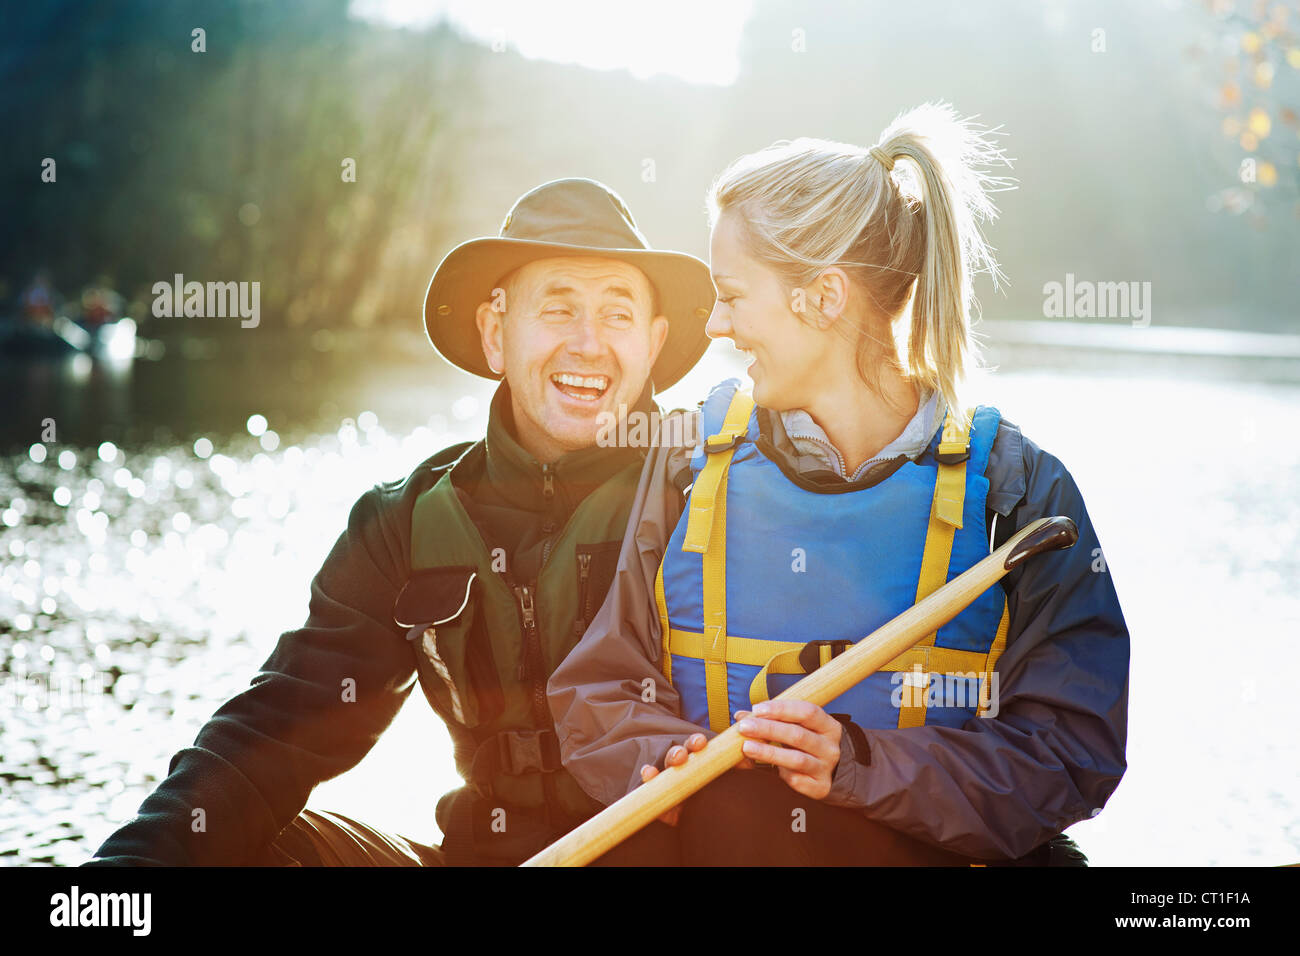 Couple sitting in canoe together Stock Photo